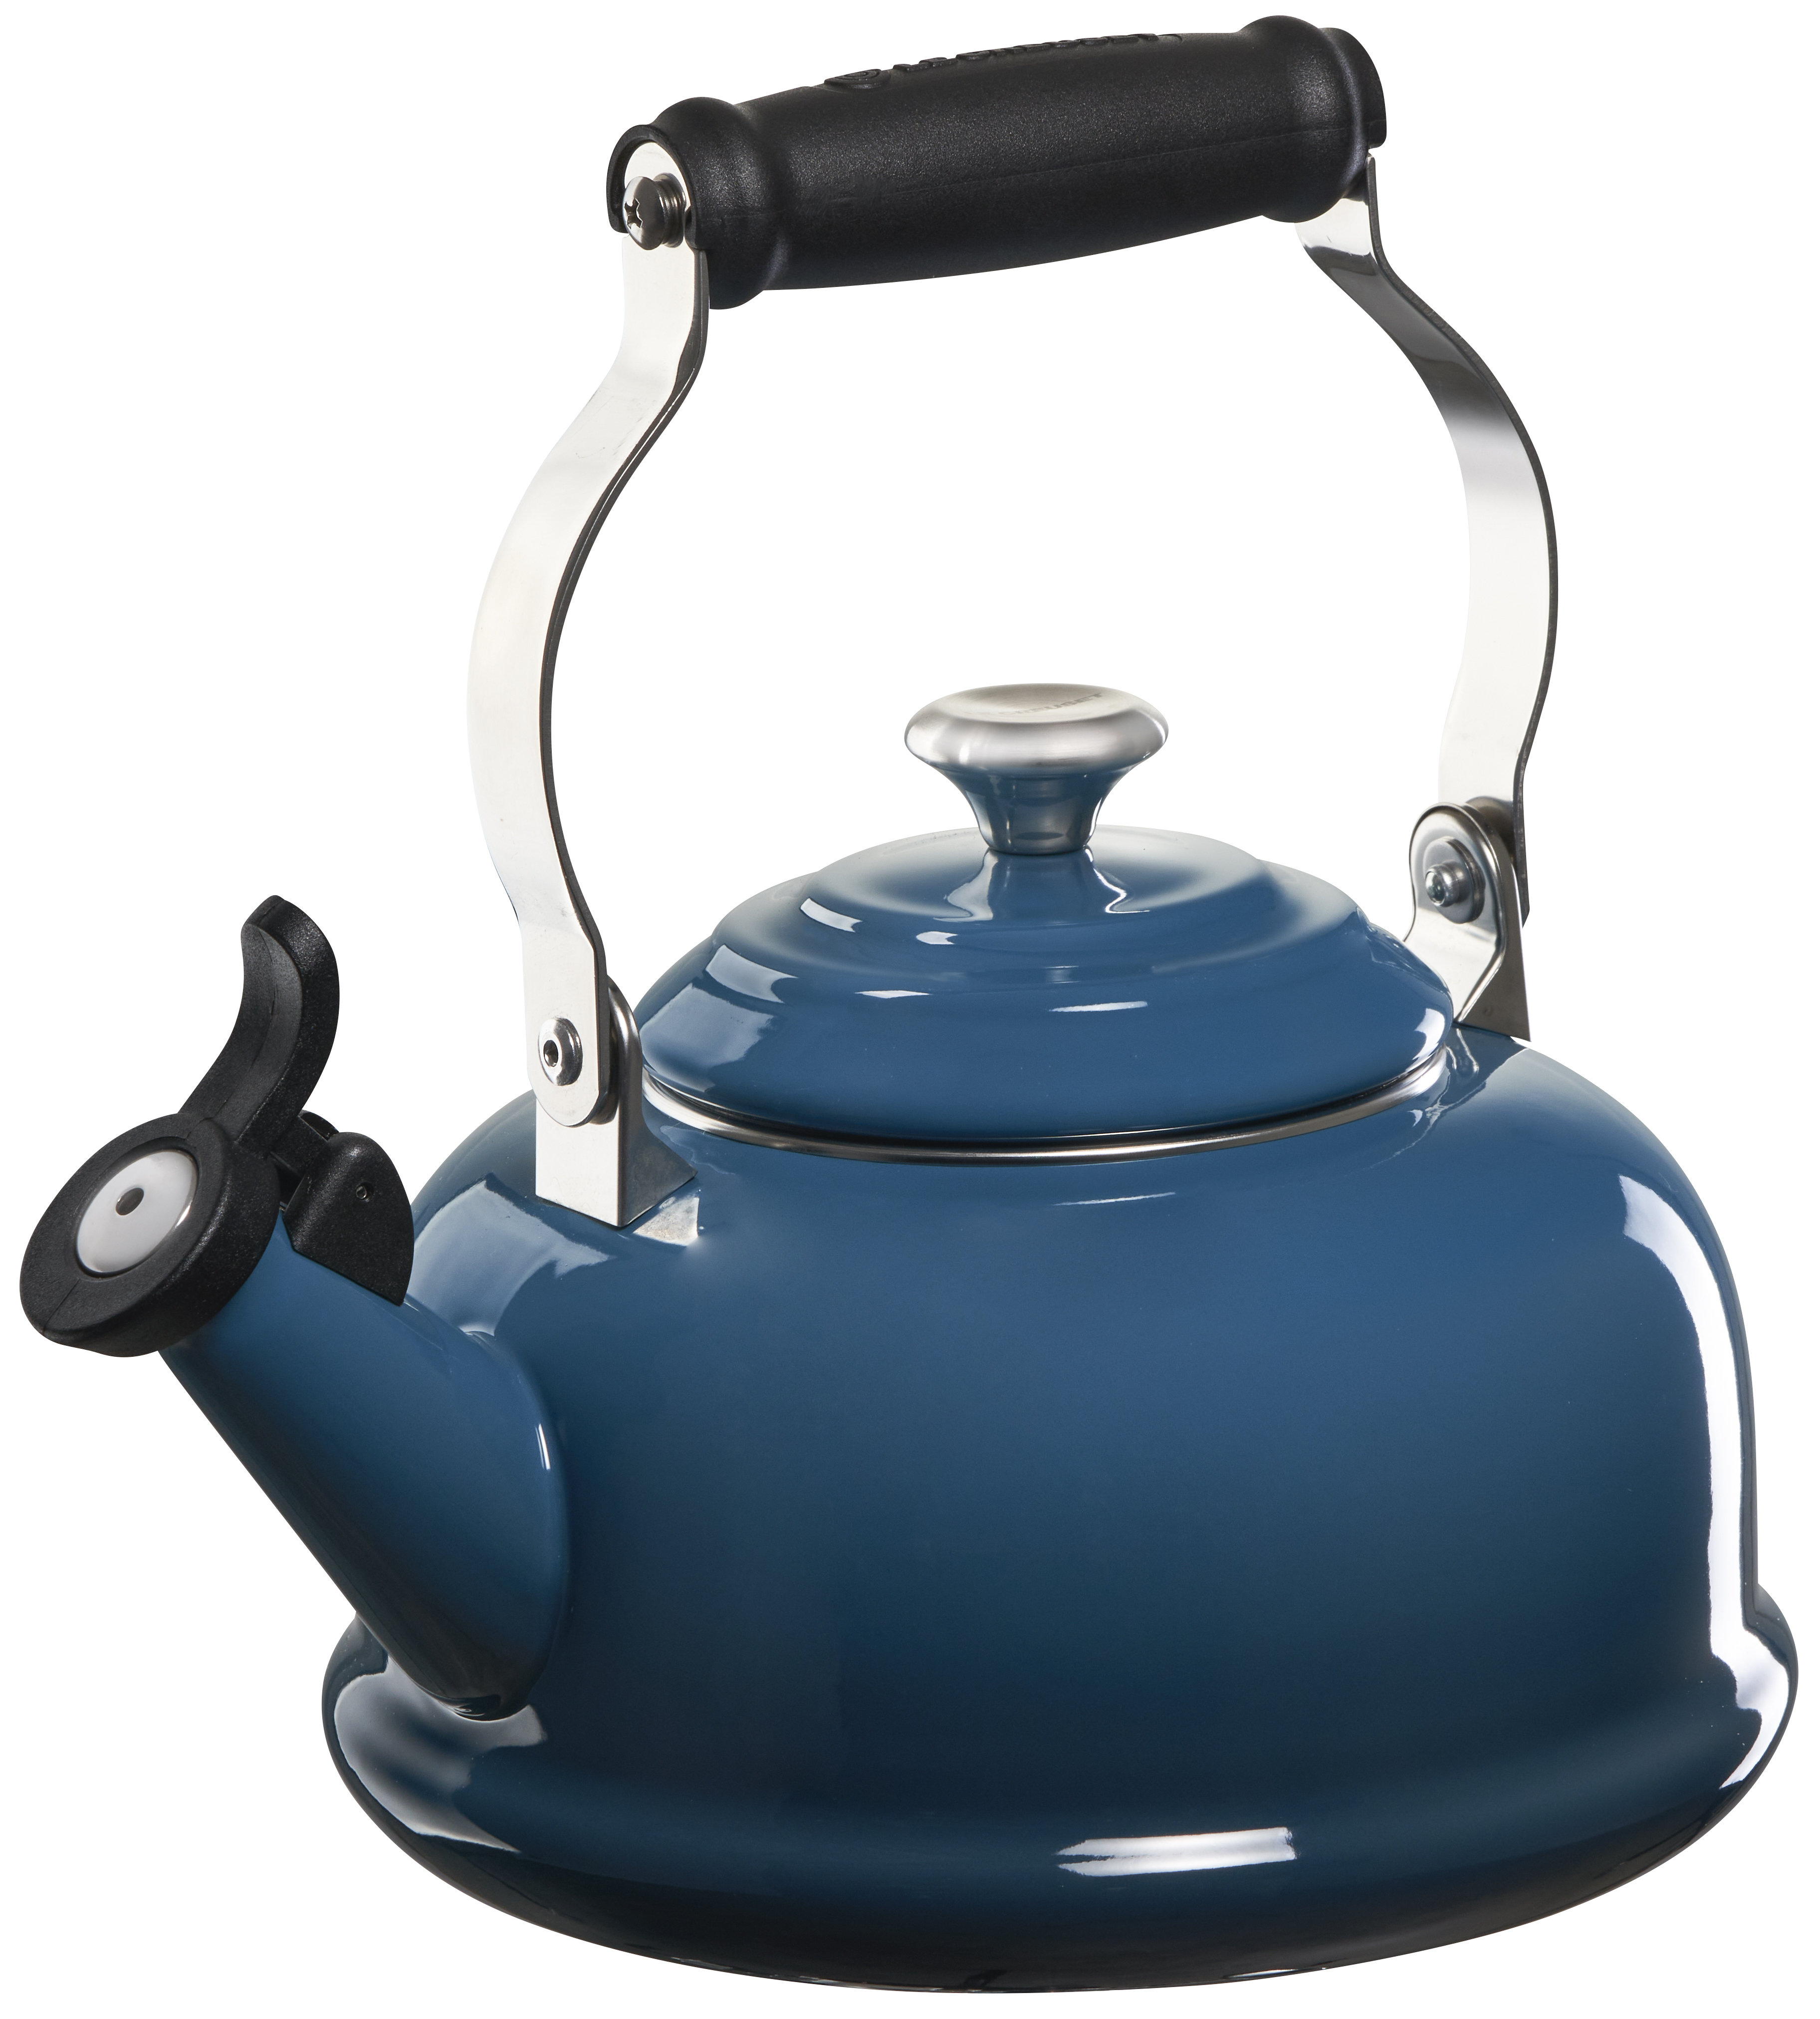 Laura Ashley 10 Cup Stainless Steel Stovetop Tea Kettle